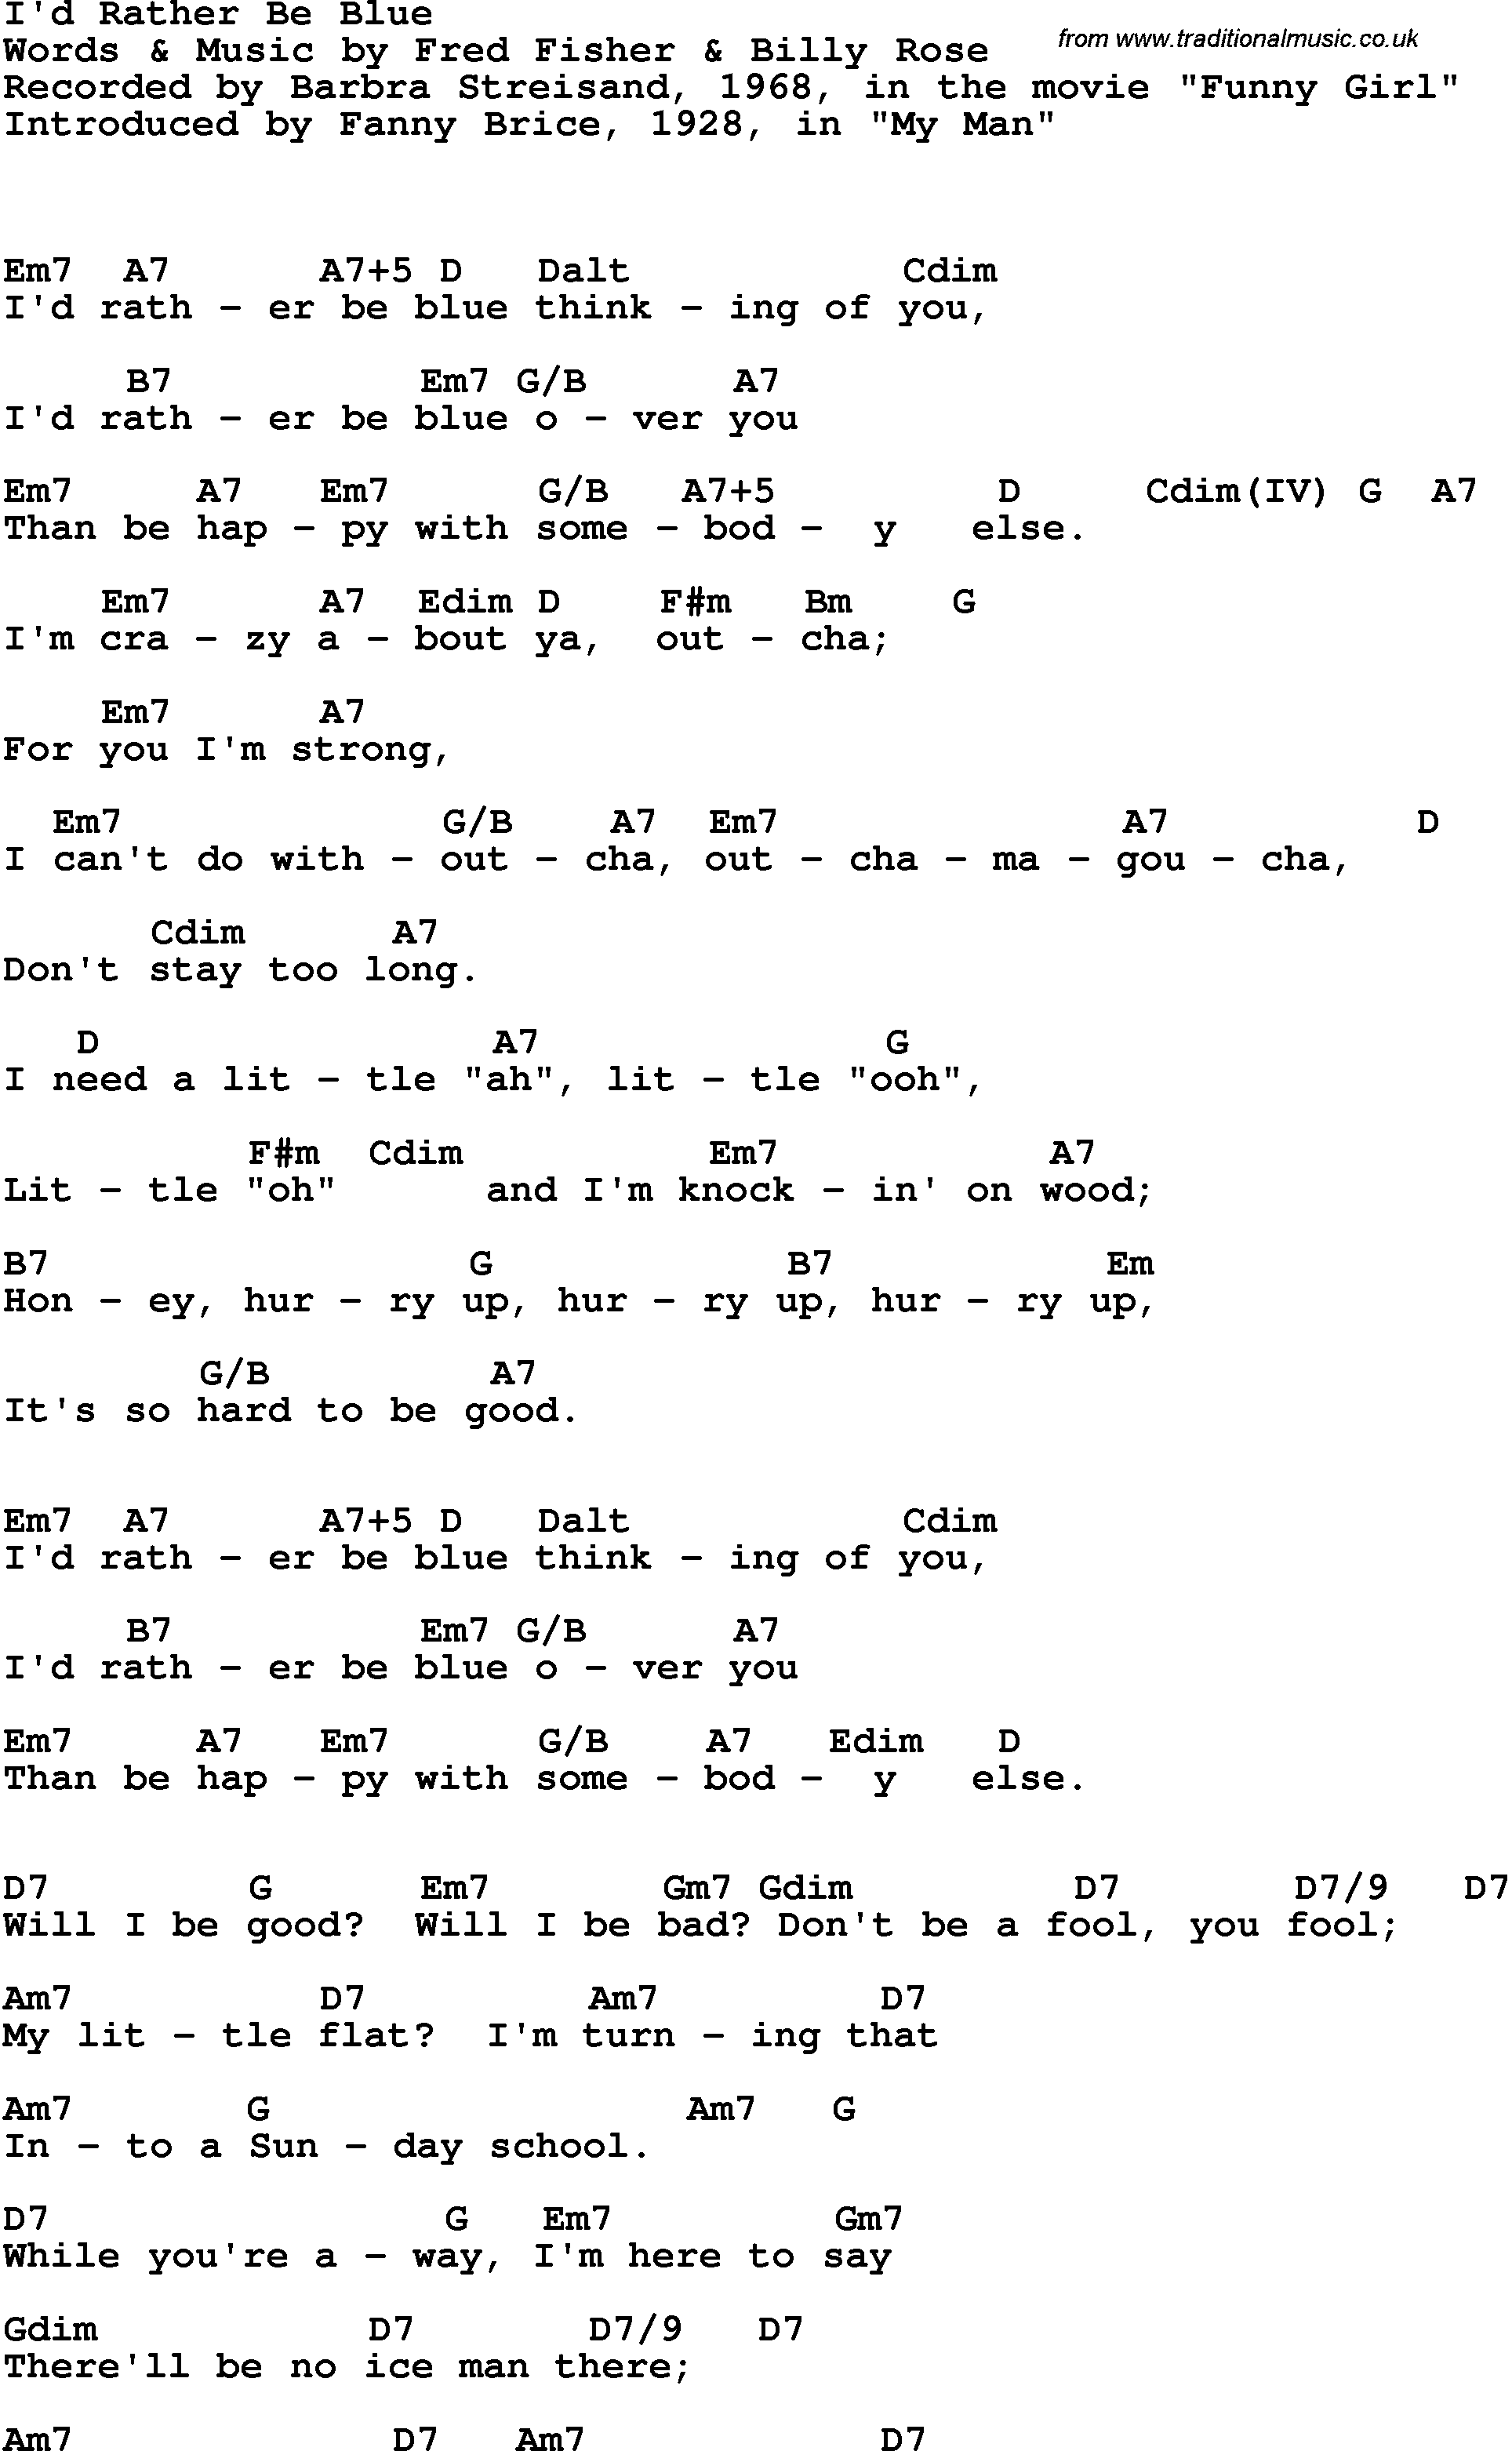 Song Lyrics with guitar chords for I'd Rather Be Blue - Barbra Streisand, 1968